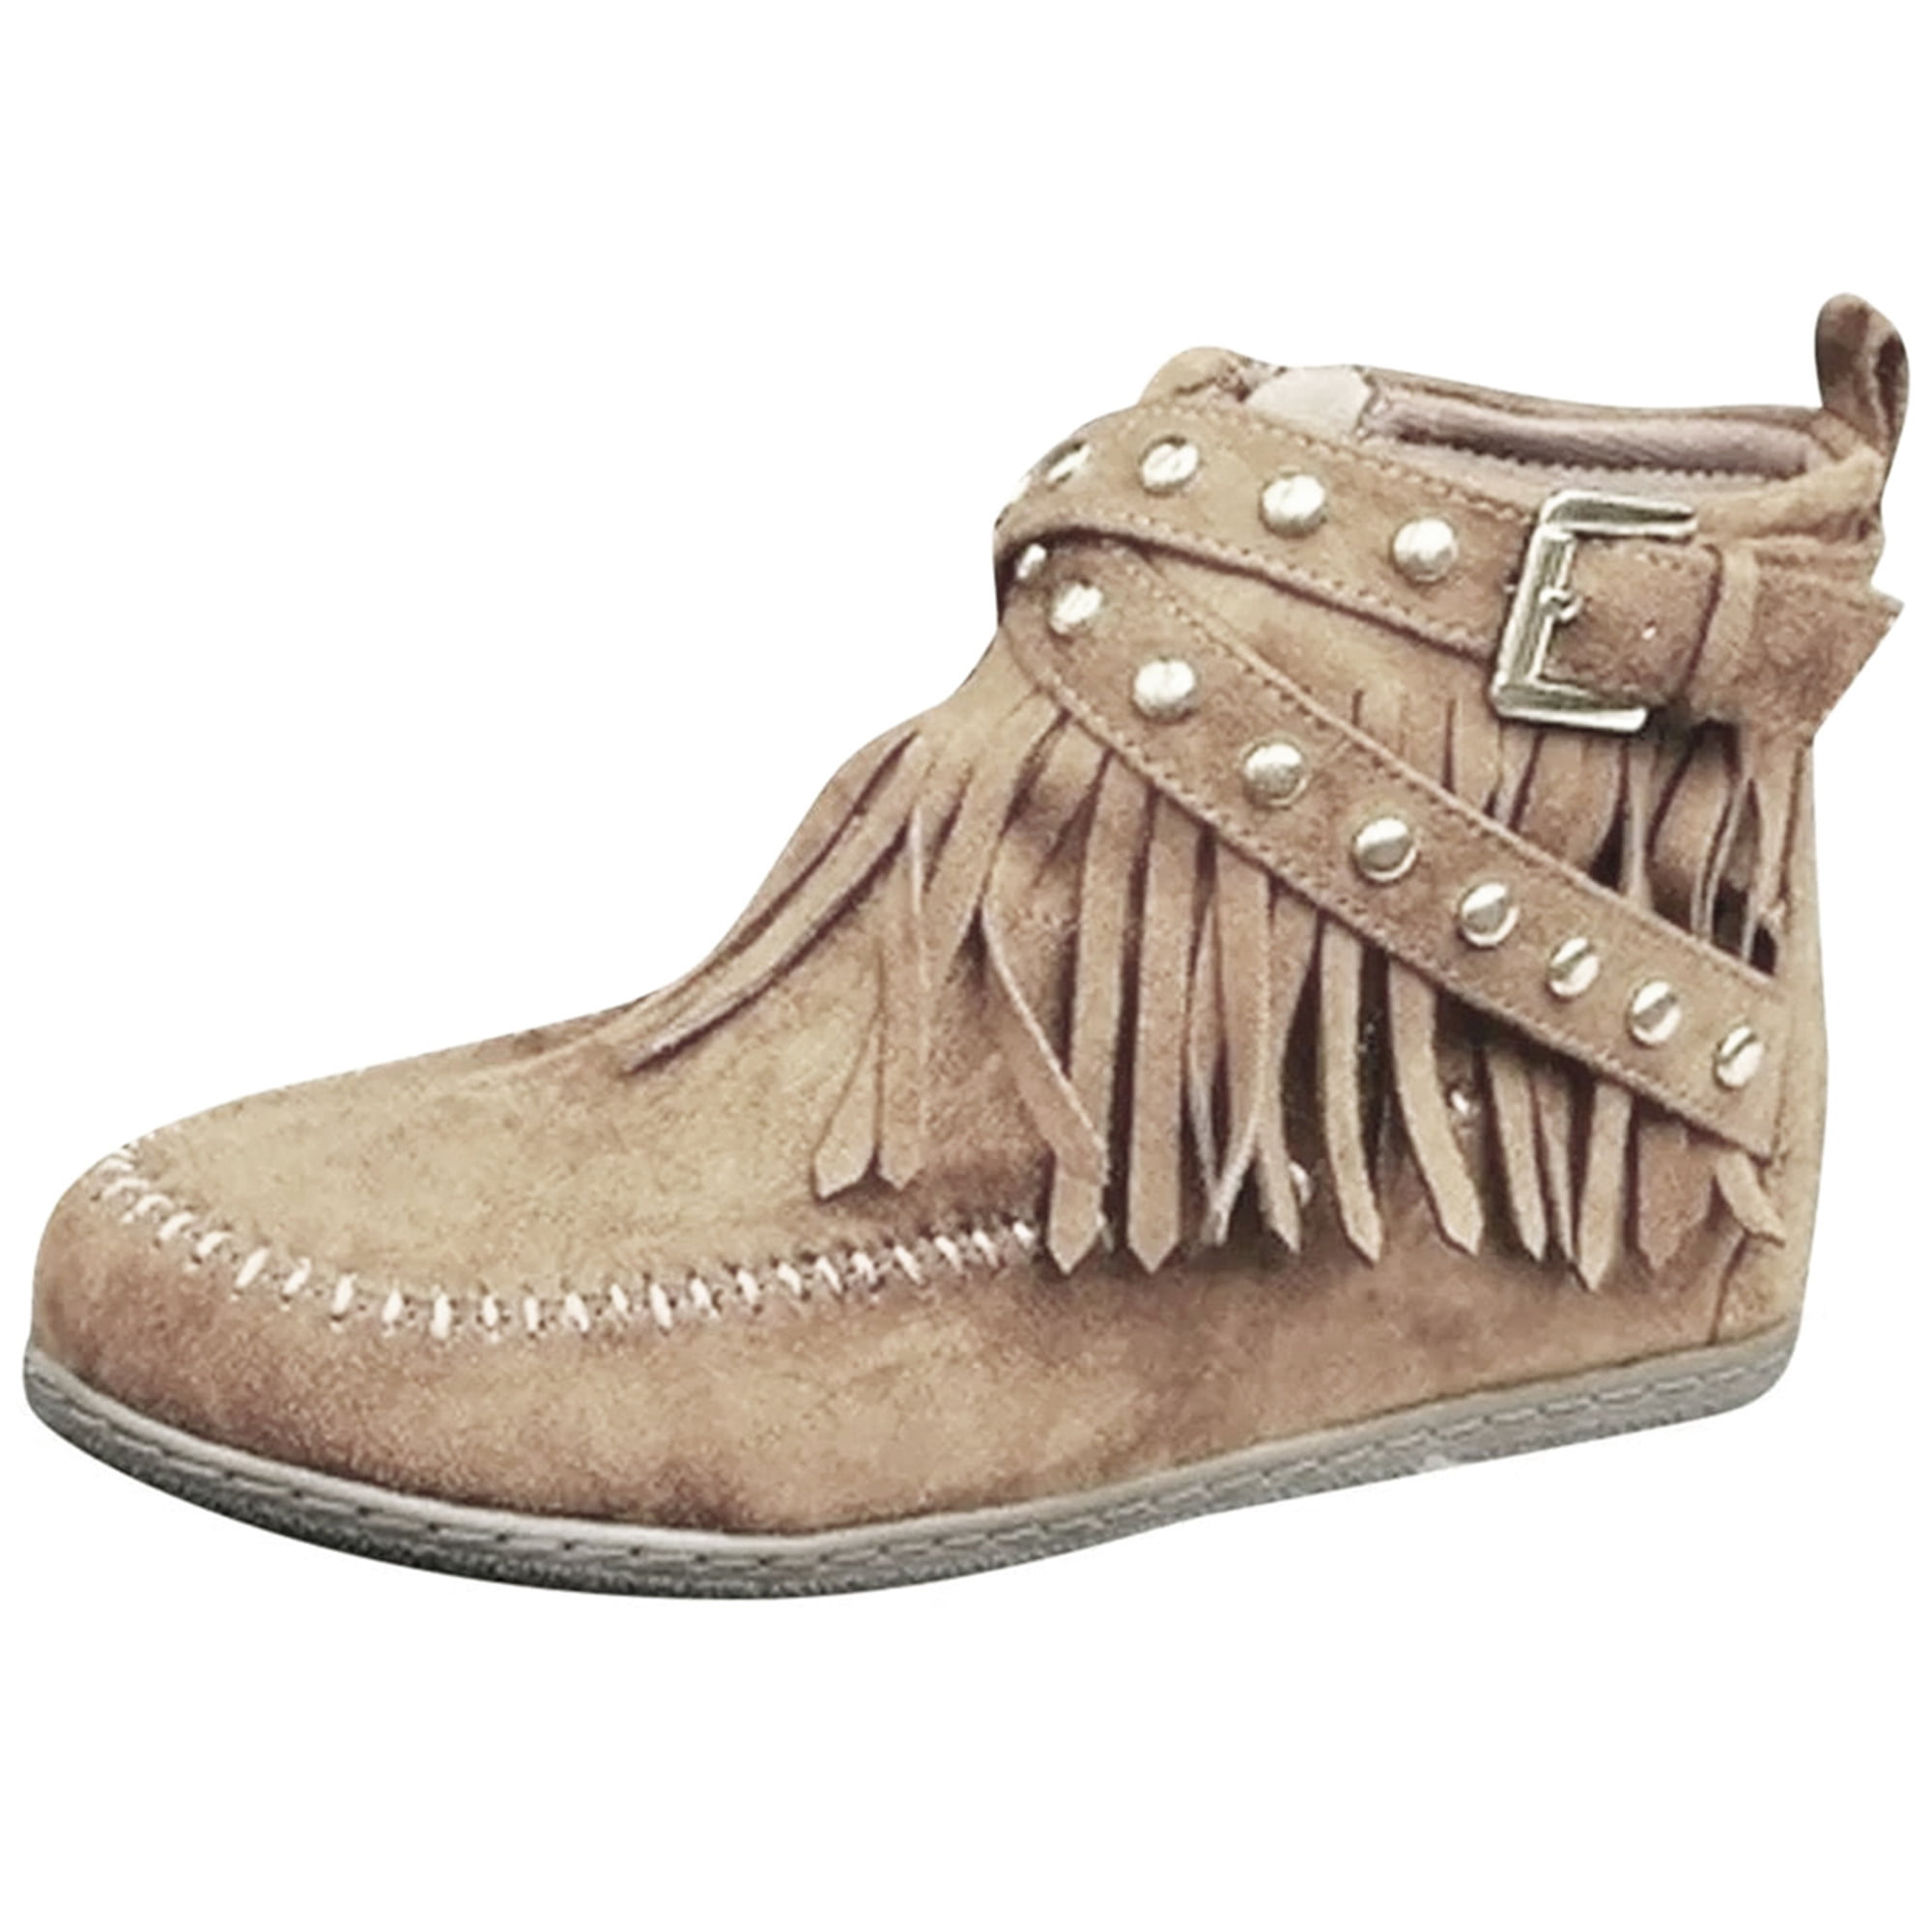 Womens Suede Tassel Fringe Moccasin Boots Flat Low Heels Mid Calf Shoes Size 